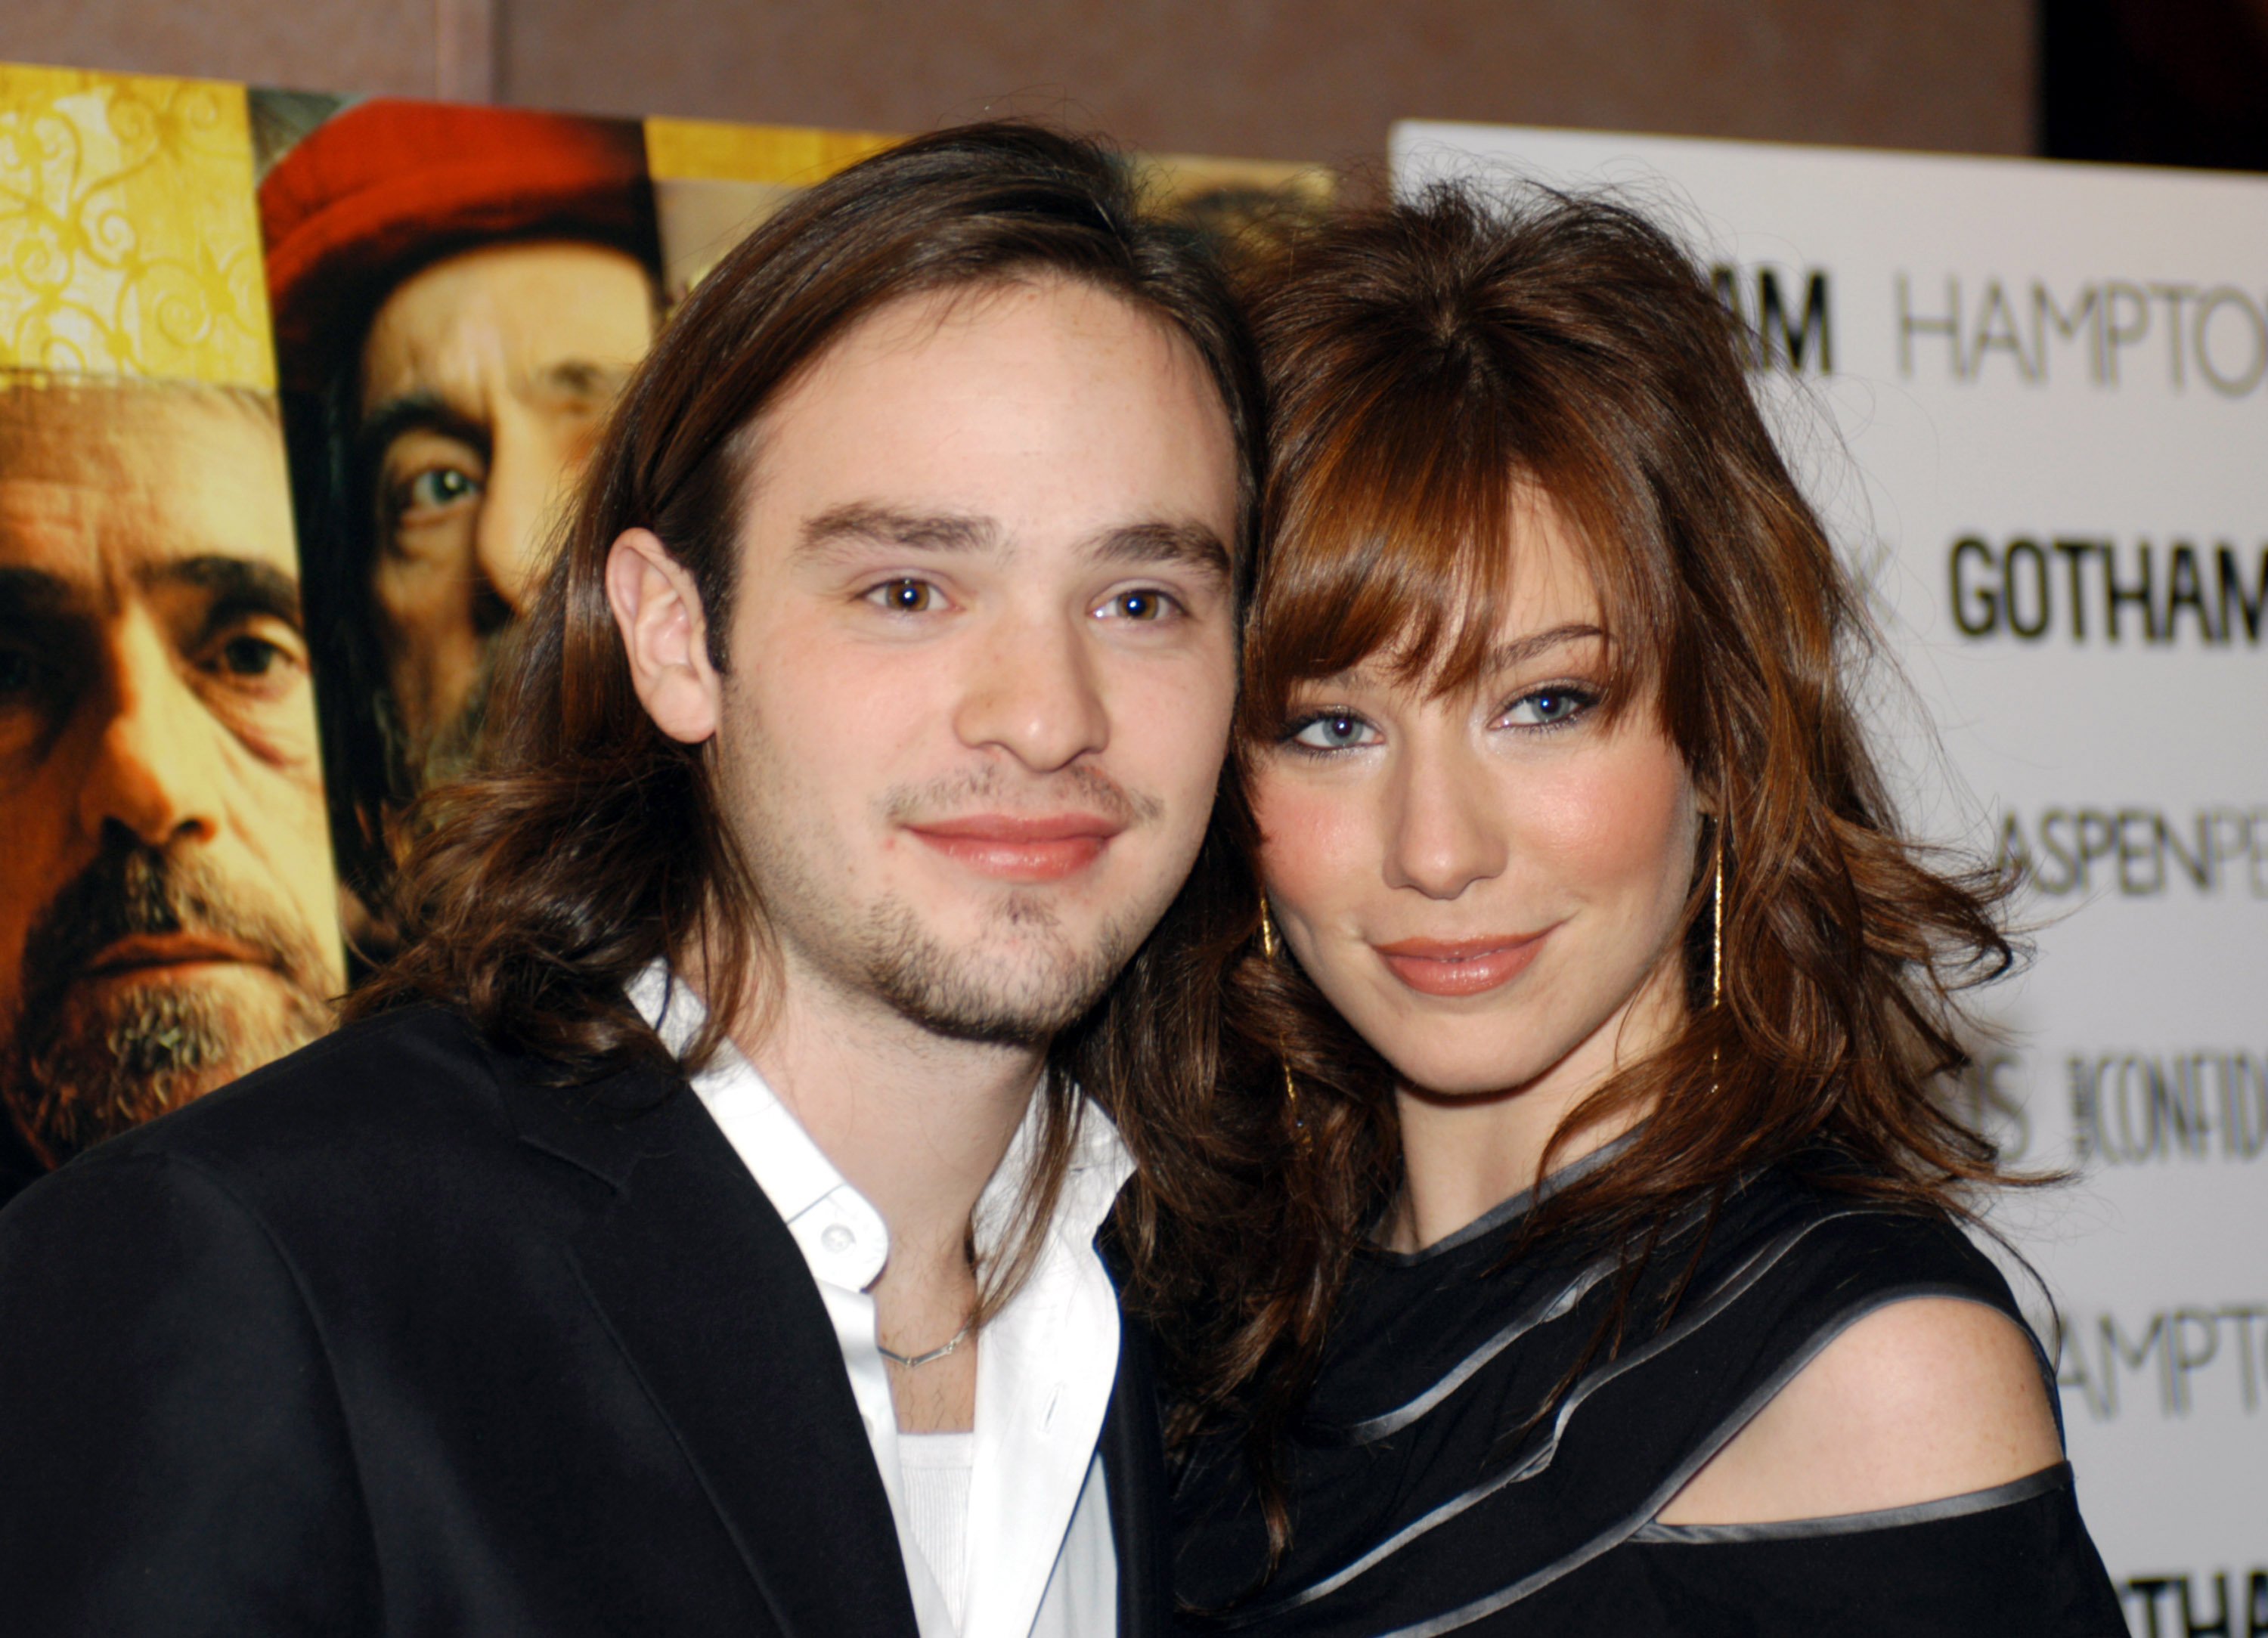 Charlie Cox and Lynn Collins at the premiere party for "The Merchant of Venice" on December 5, 2004. | Source: Getty Images